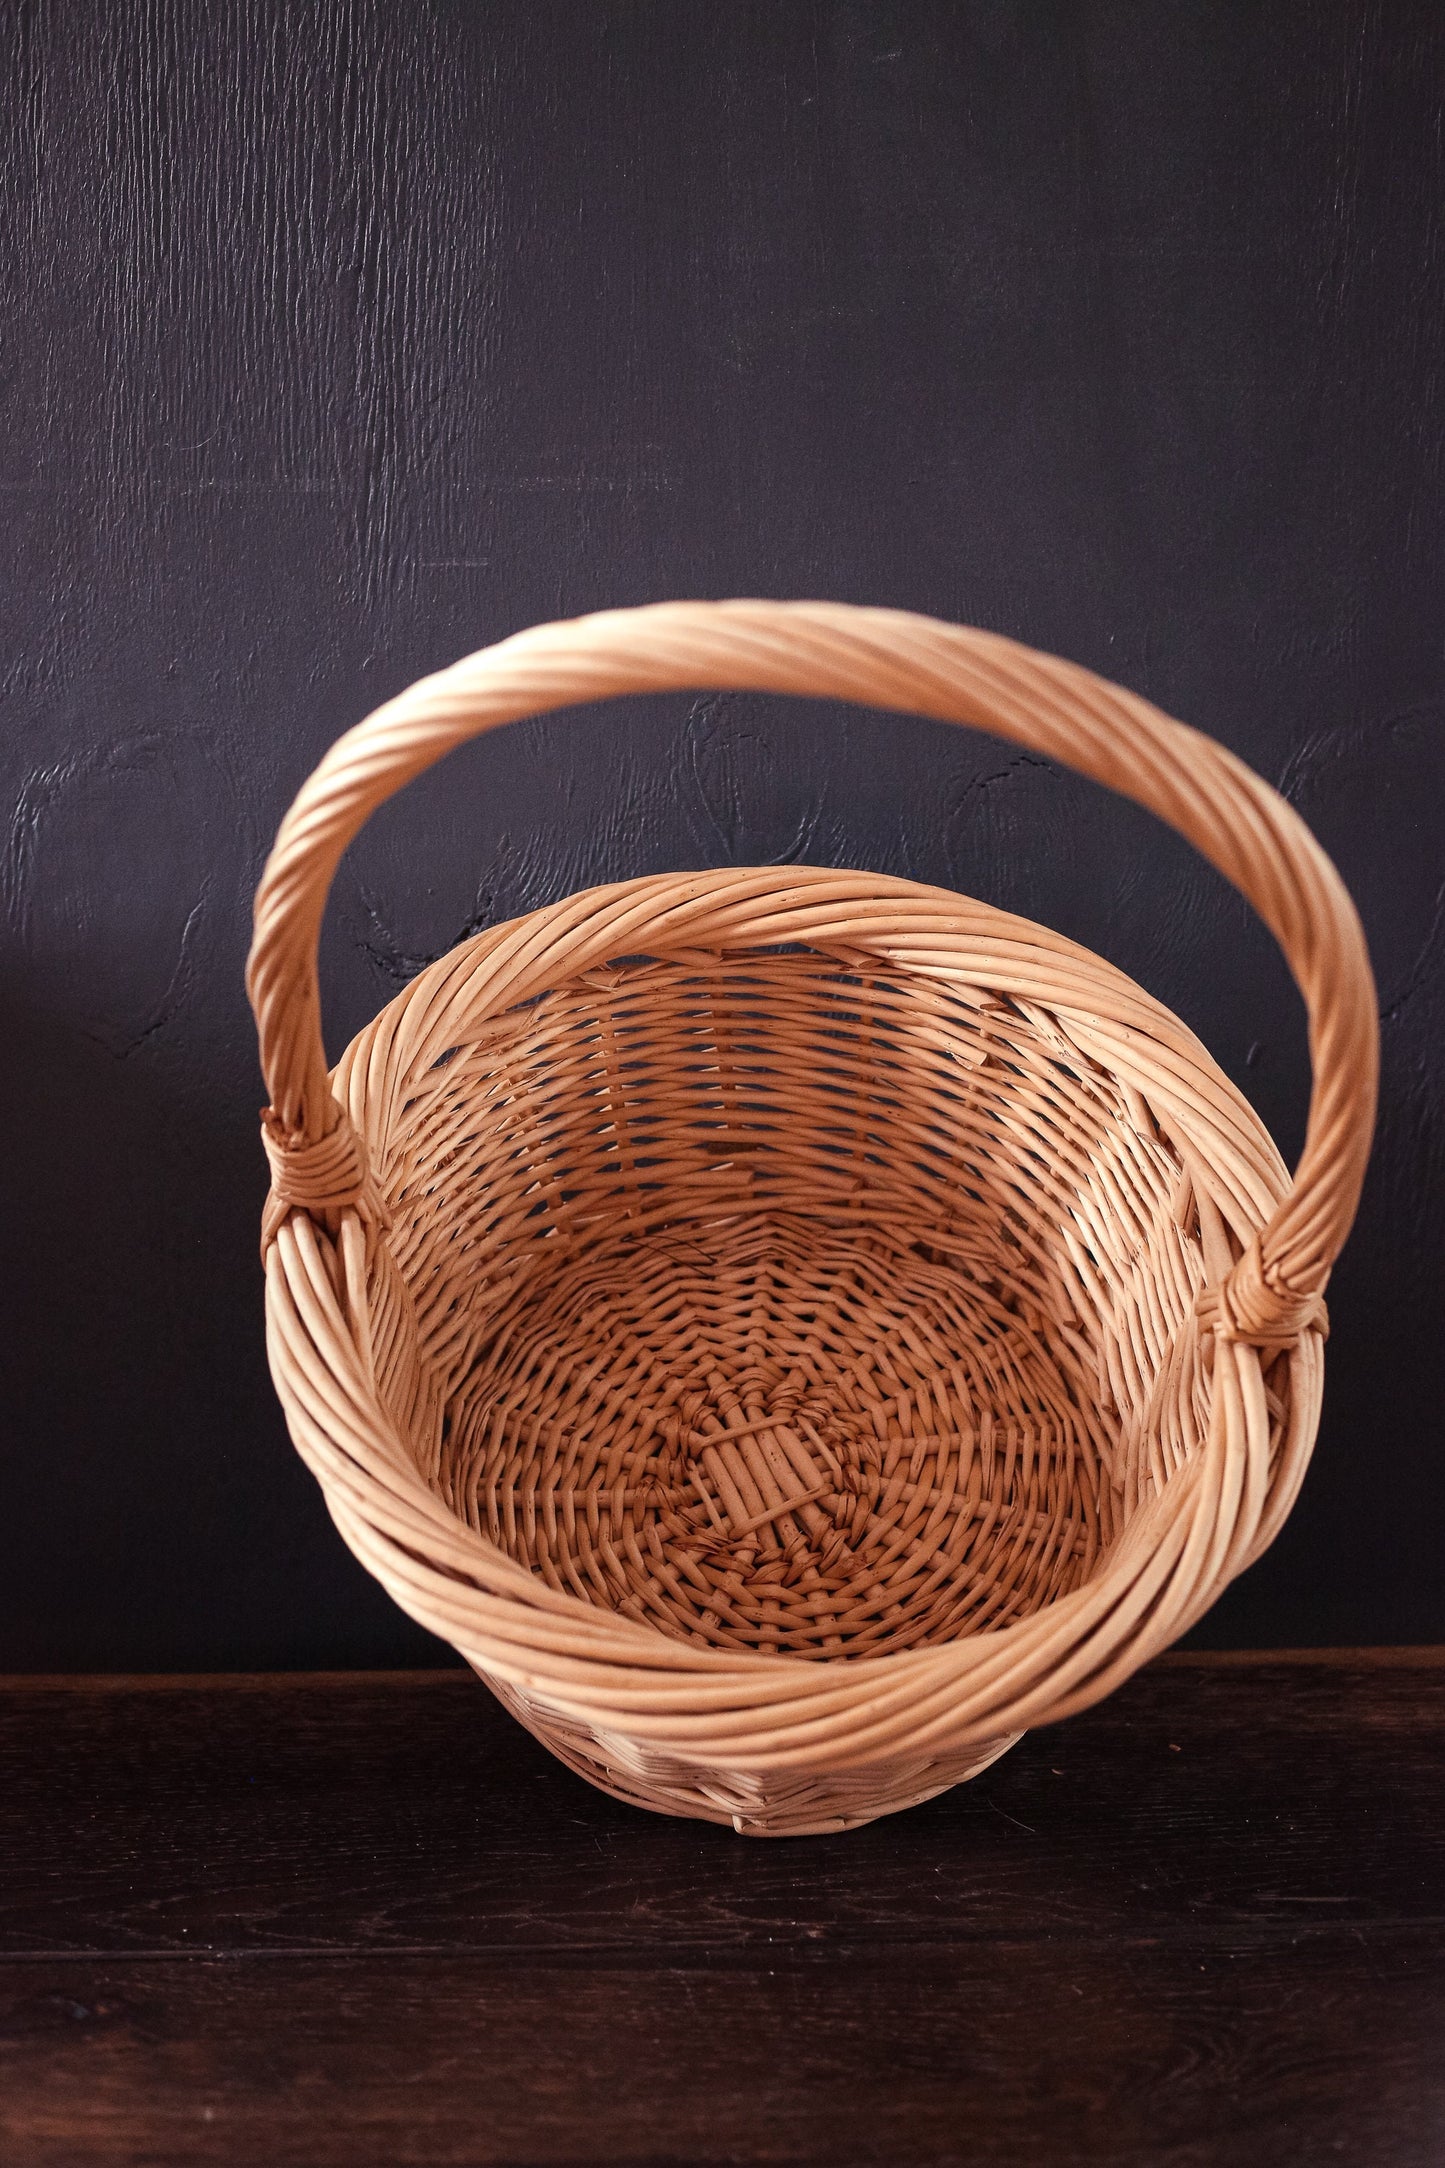 Round Flat Bottom Bleached Willow Basket with High Handle - Vintage Wicker Rattan Basket